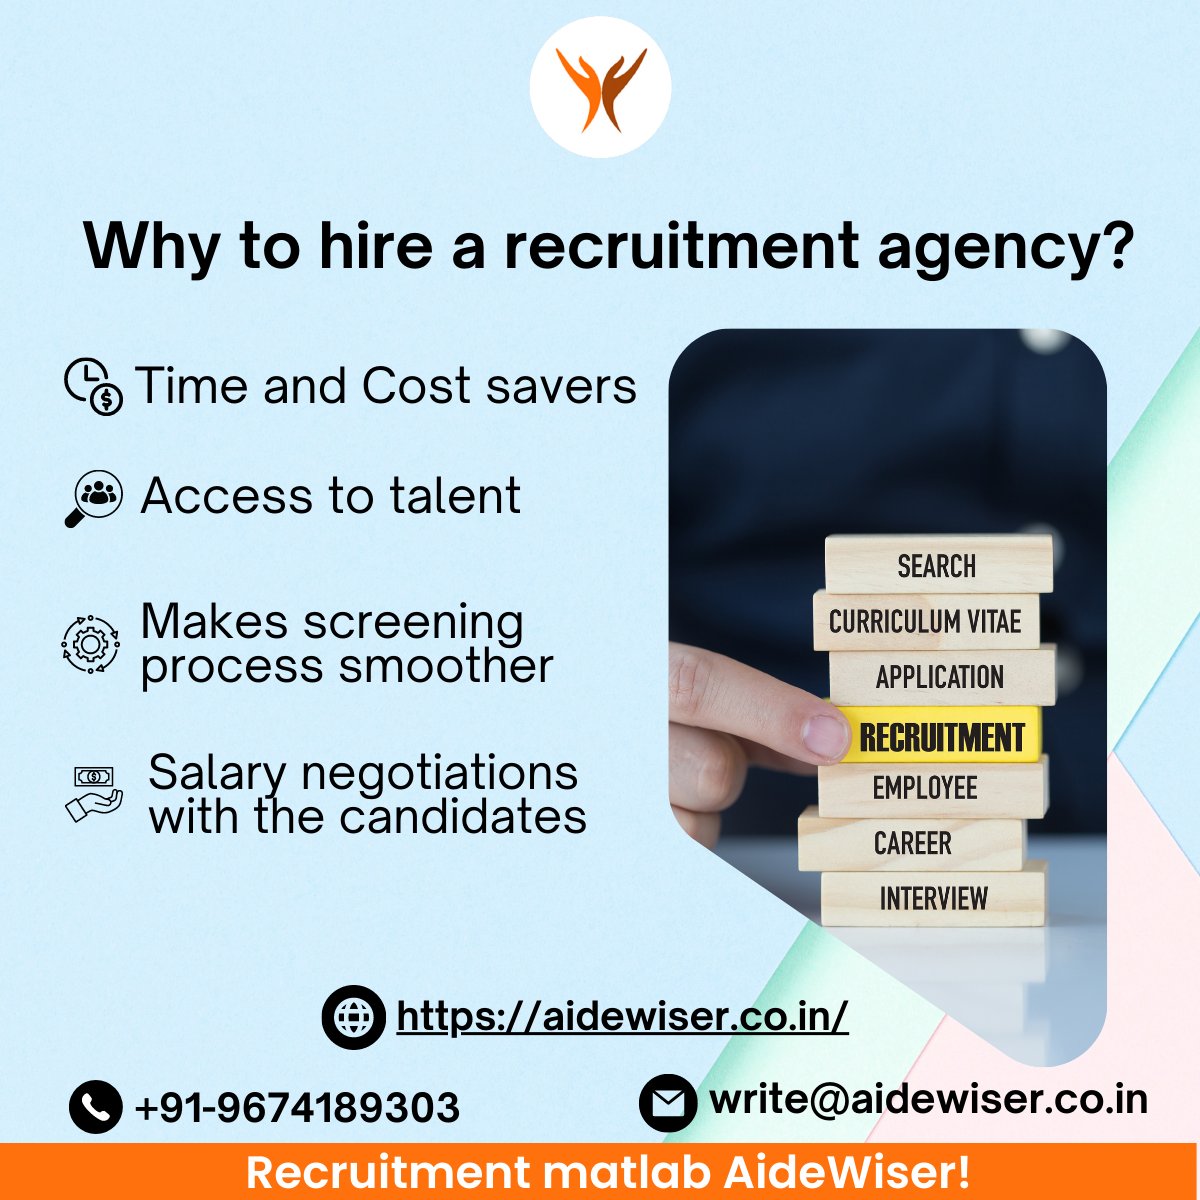 Recruitment agencies acts as mediator between the company and the candidates. We run basic screening test on the applicant to check their suitability for the job before referring to the company
#recruitementconsultants #job #effectivesolution #staffingcompany #recruitementagency